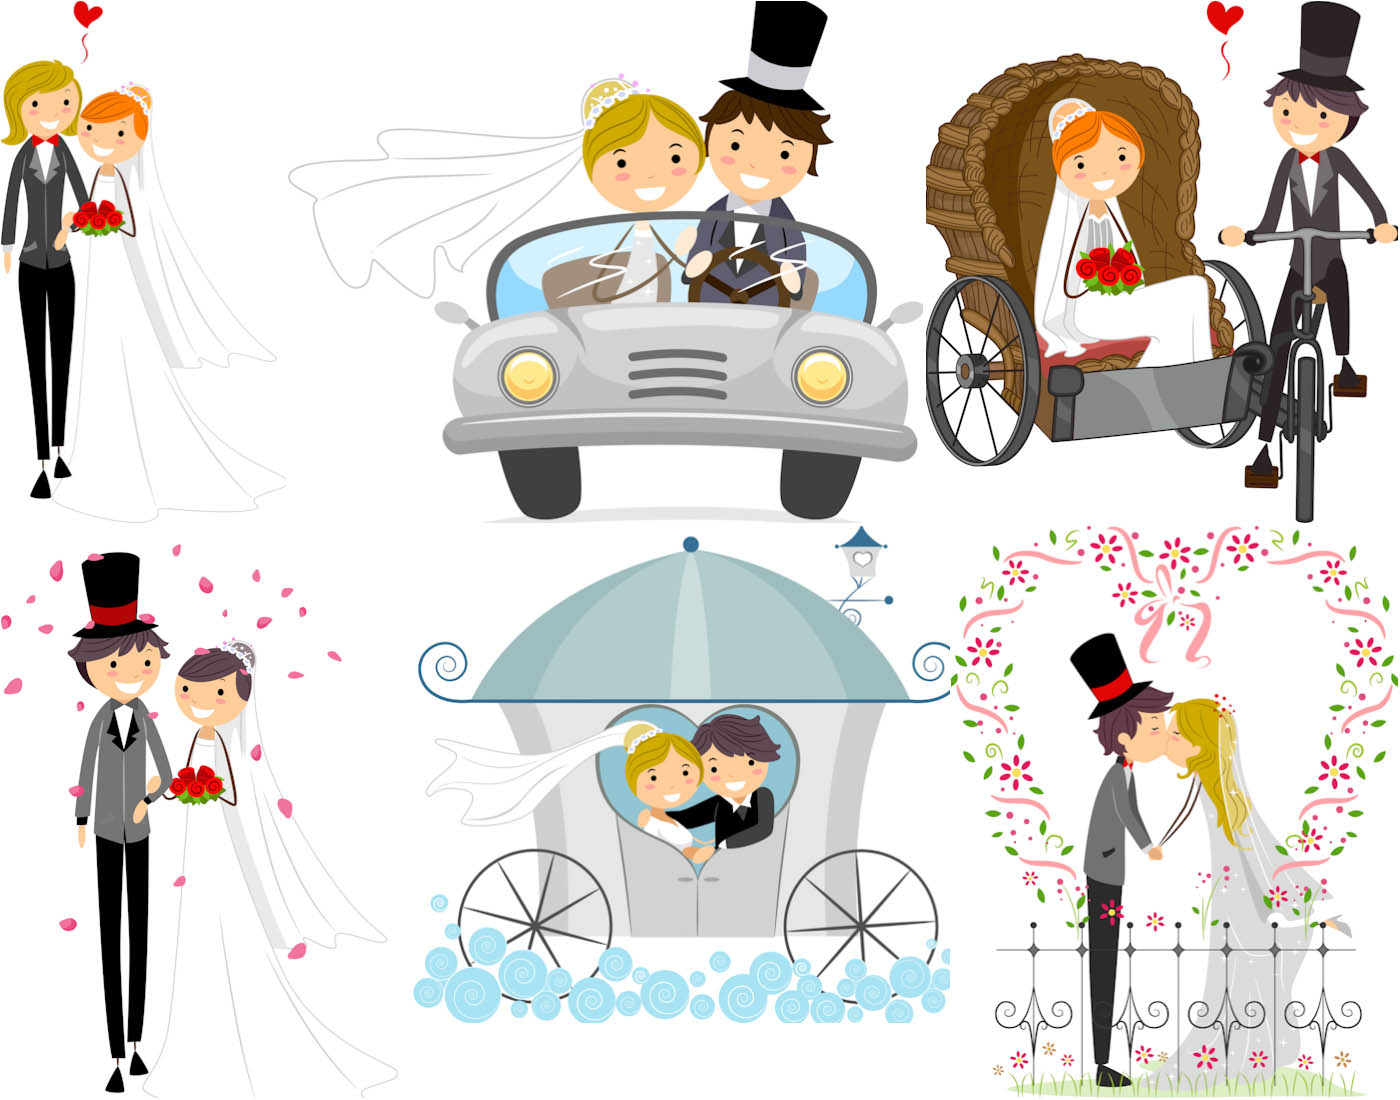 wedding card clipart free download - photo #38